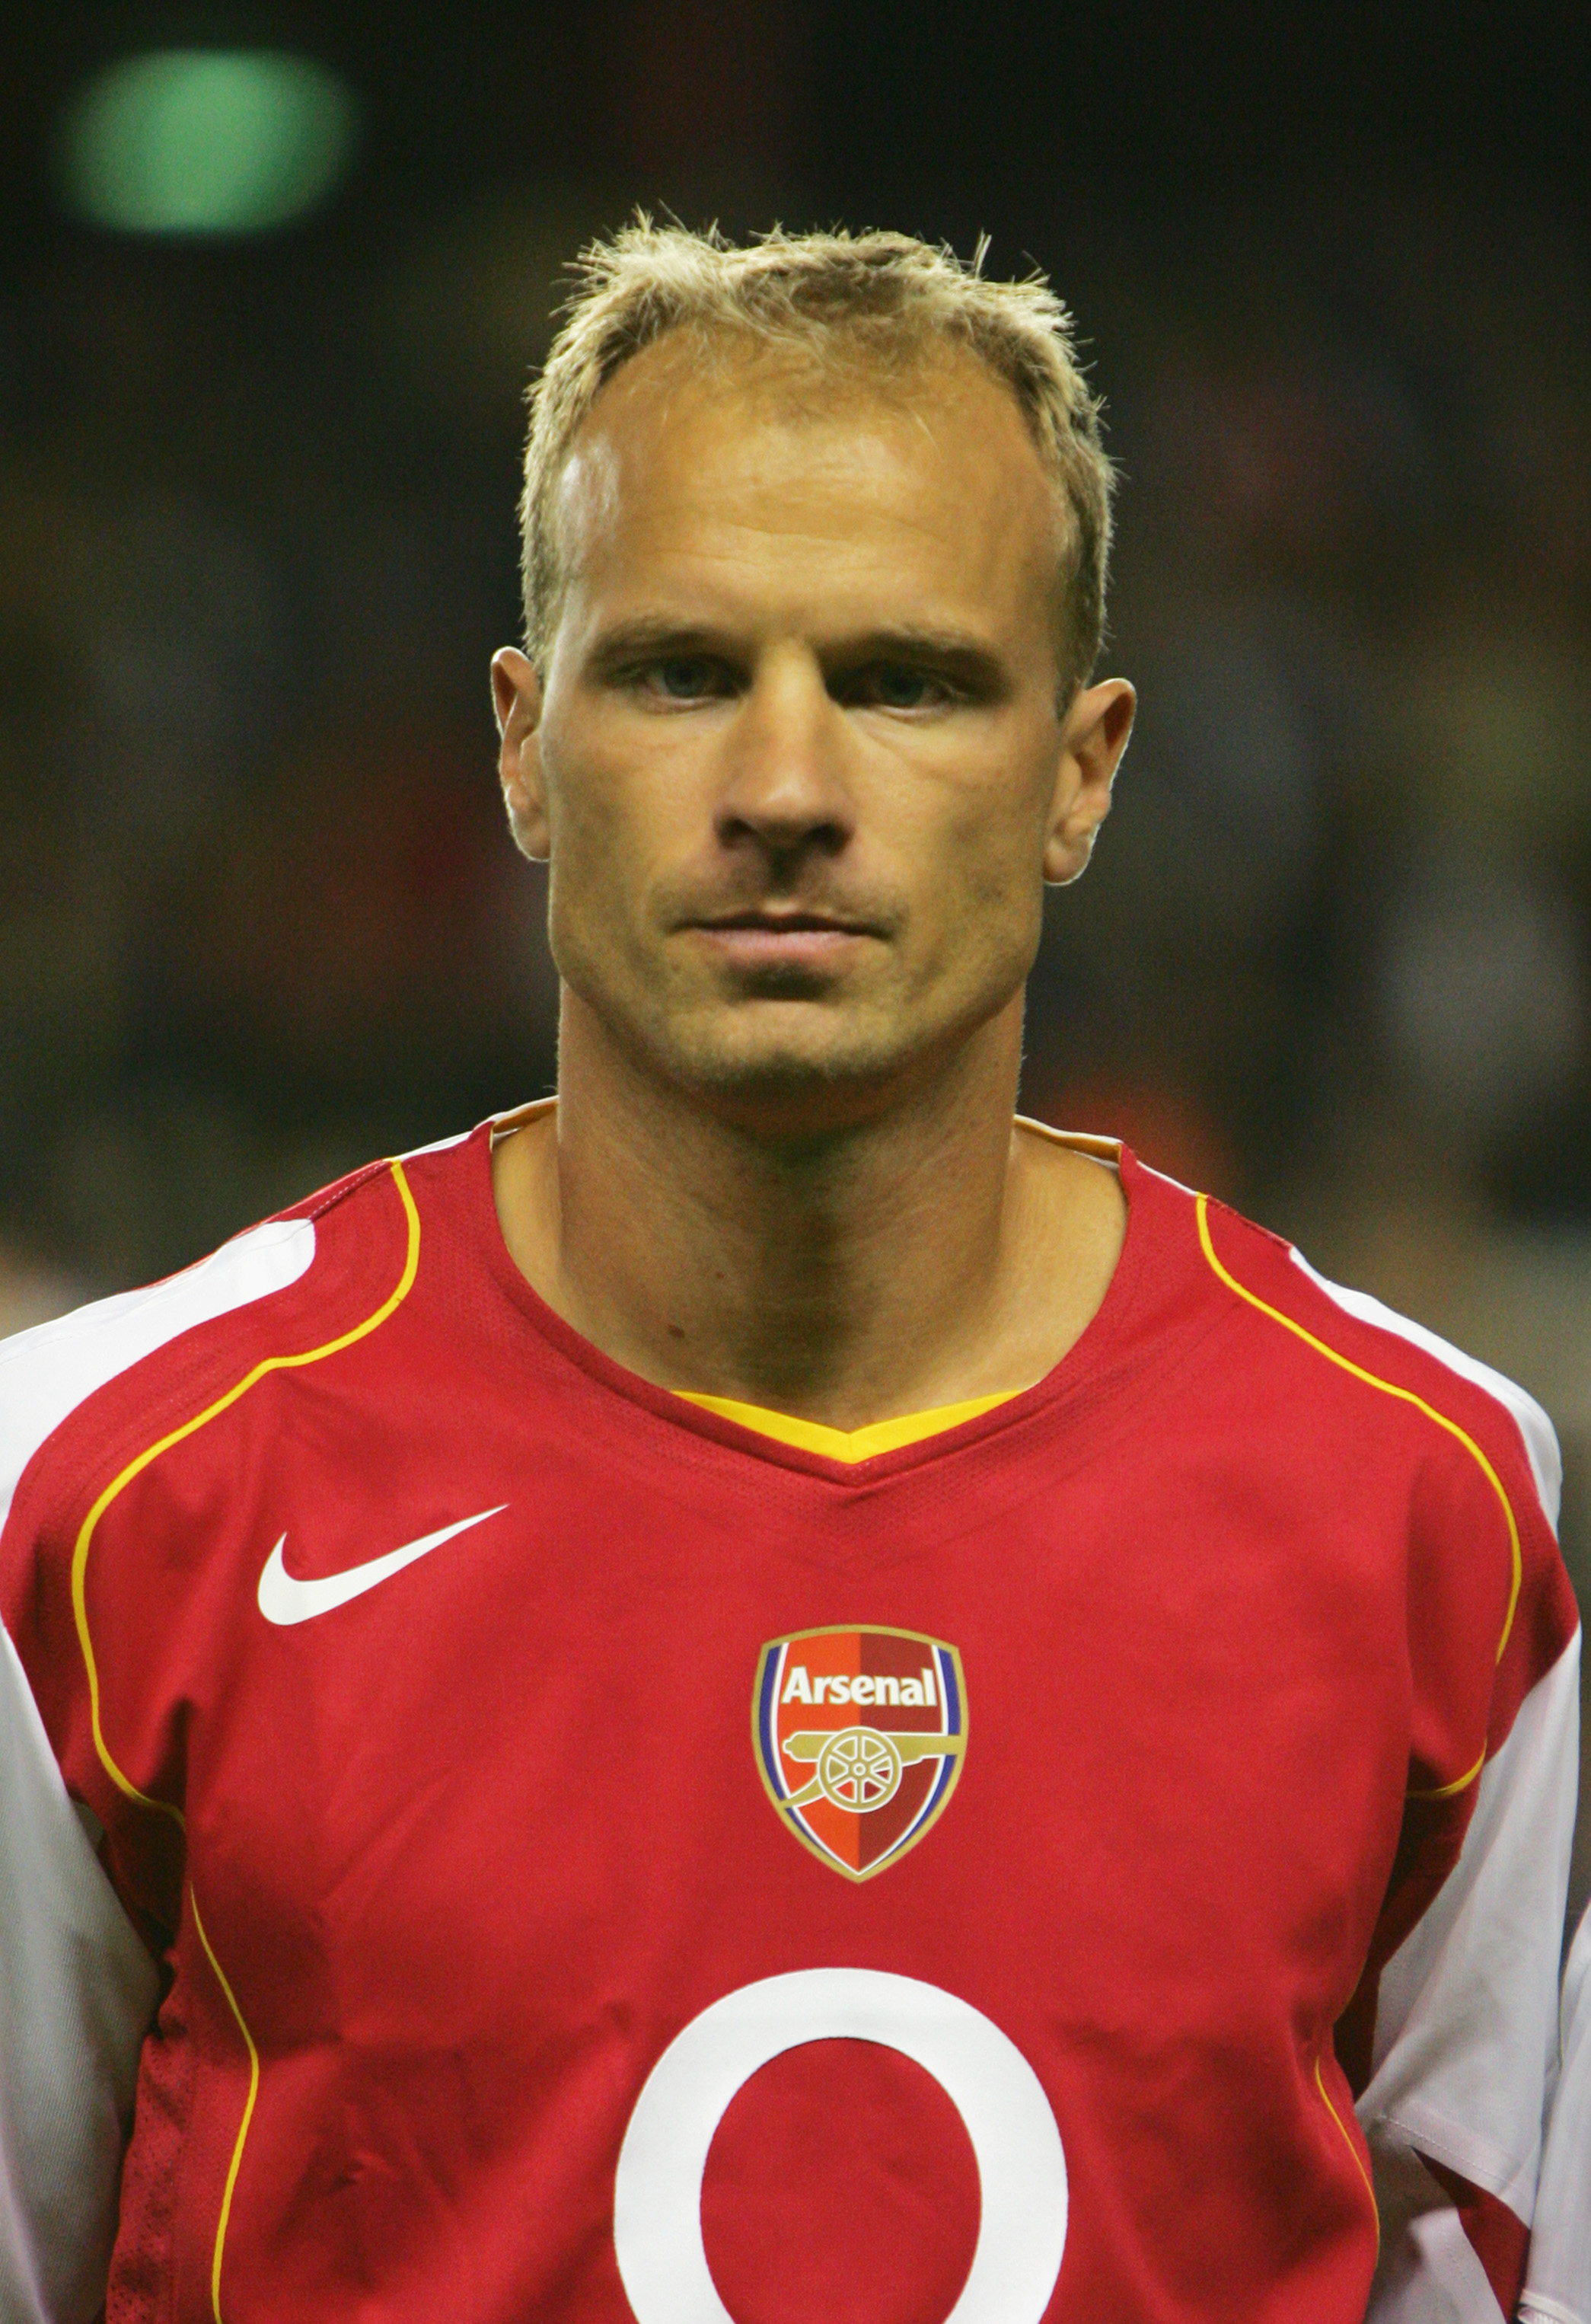 LONDON - SEPTEMBER 14:  A portrait of Dennis Bergkamp of Arsenal prior to the UEFA Champions League, Group E match between Arsenal and PSV Eindhoven at Highbury on Septemner 14, 2004 in London, England.  (Photo by Clive Rose/Getty Images)